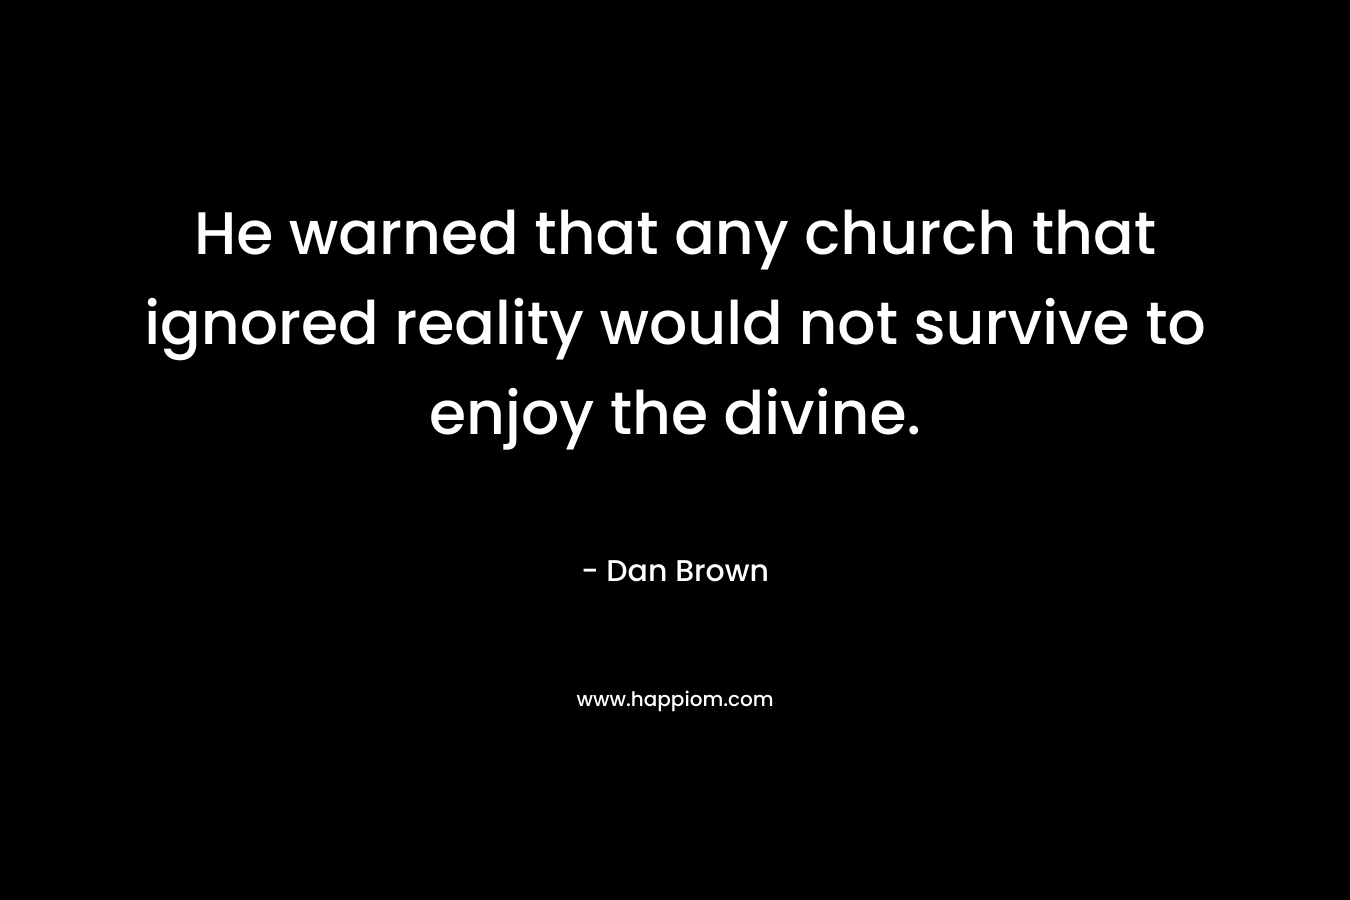 He warned that any church that ignored reality would not survive to enjoy the divine. – Dan Brown